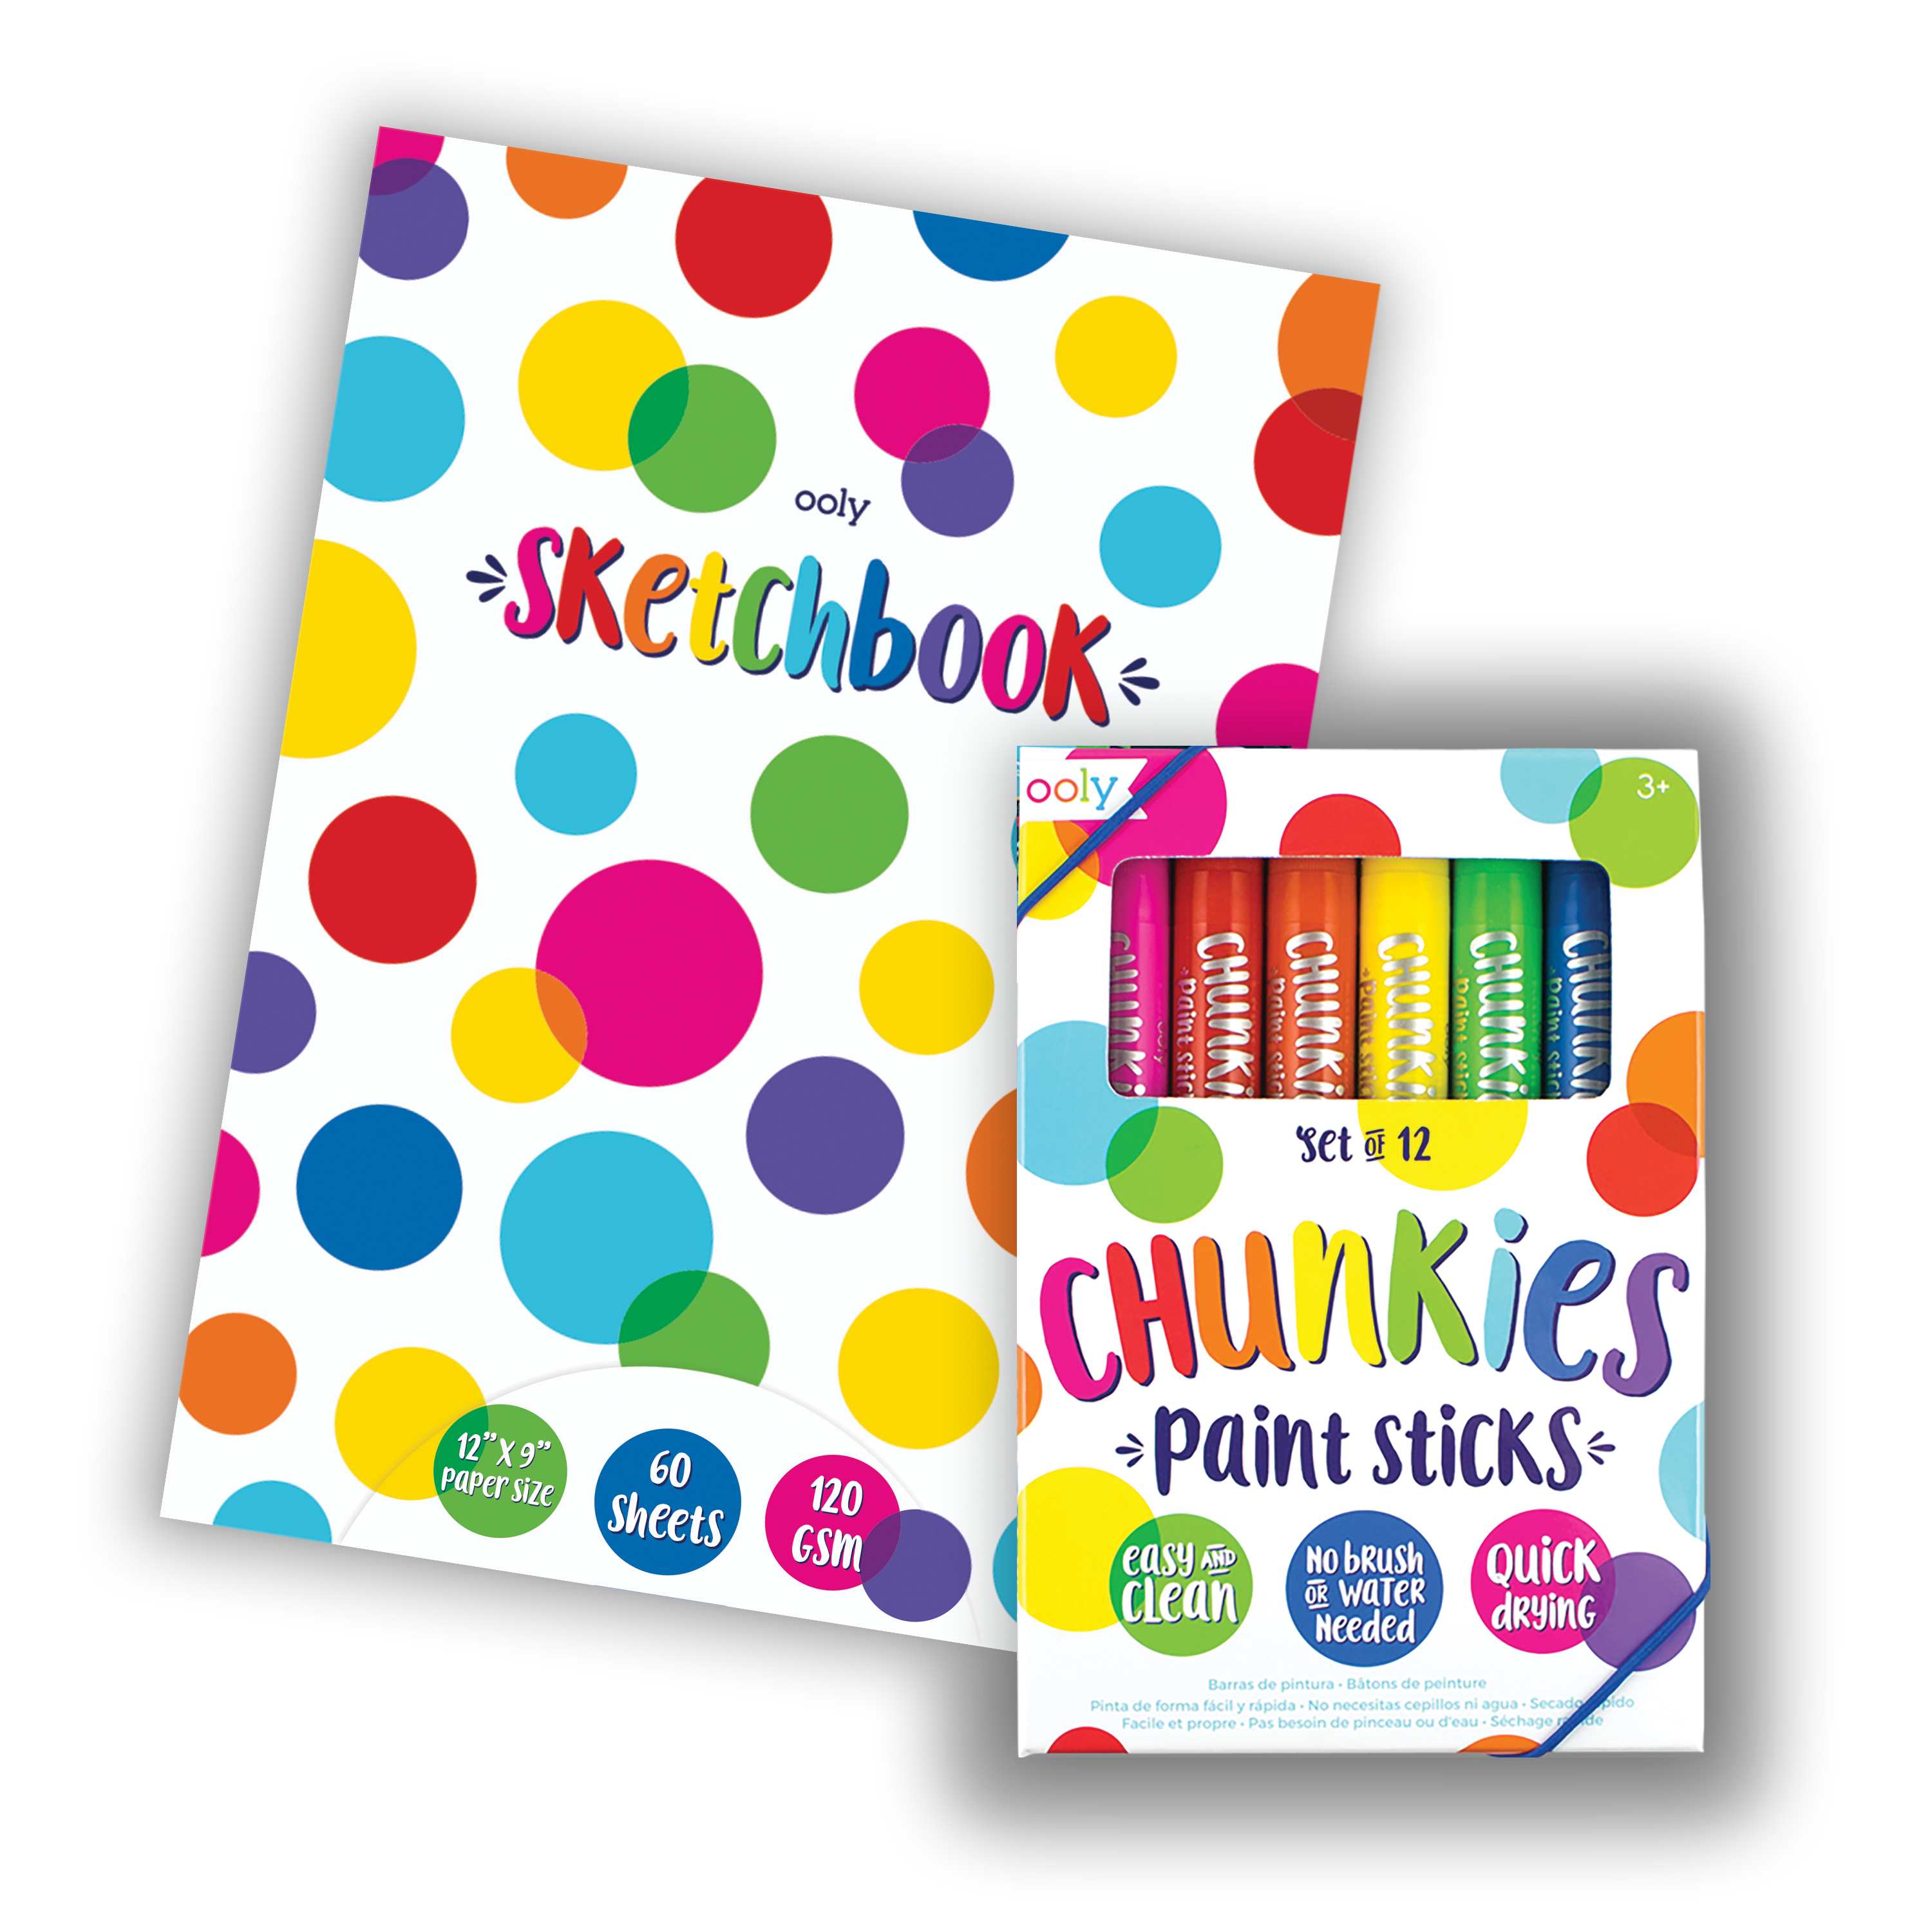 OOLY Budding Artist kids paint gift set with paint sticks and sketchbook out of gift wrap